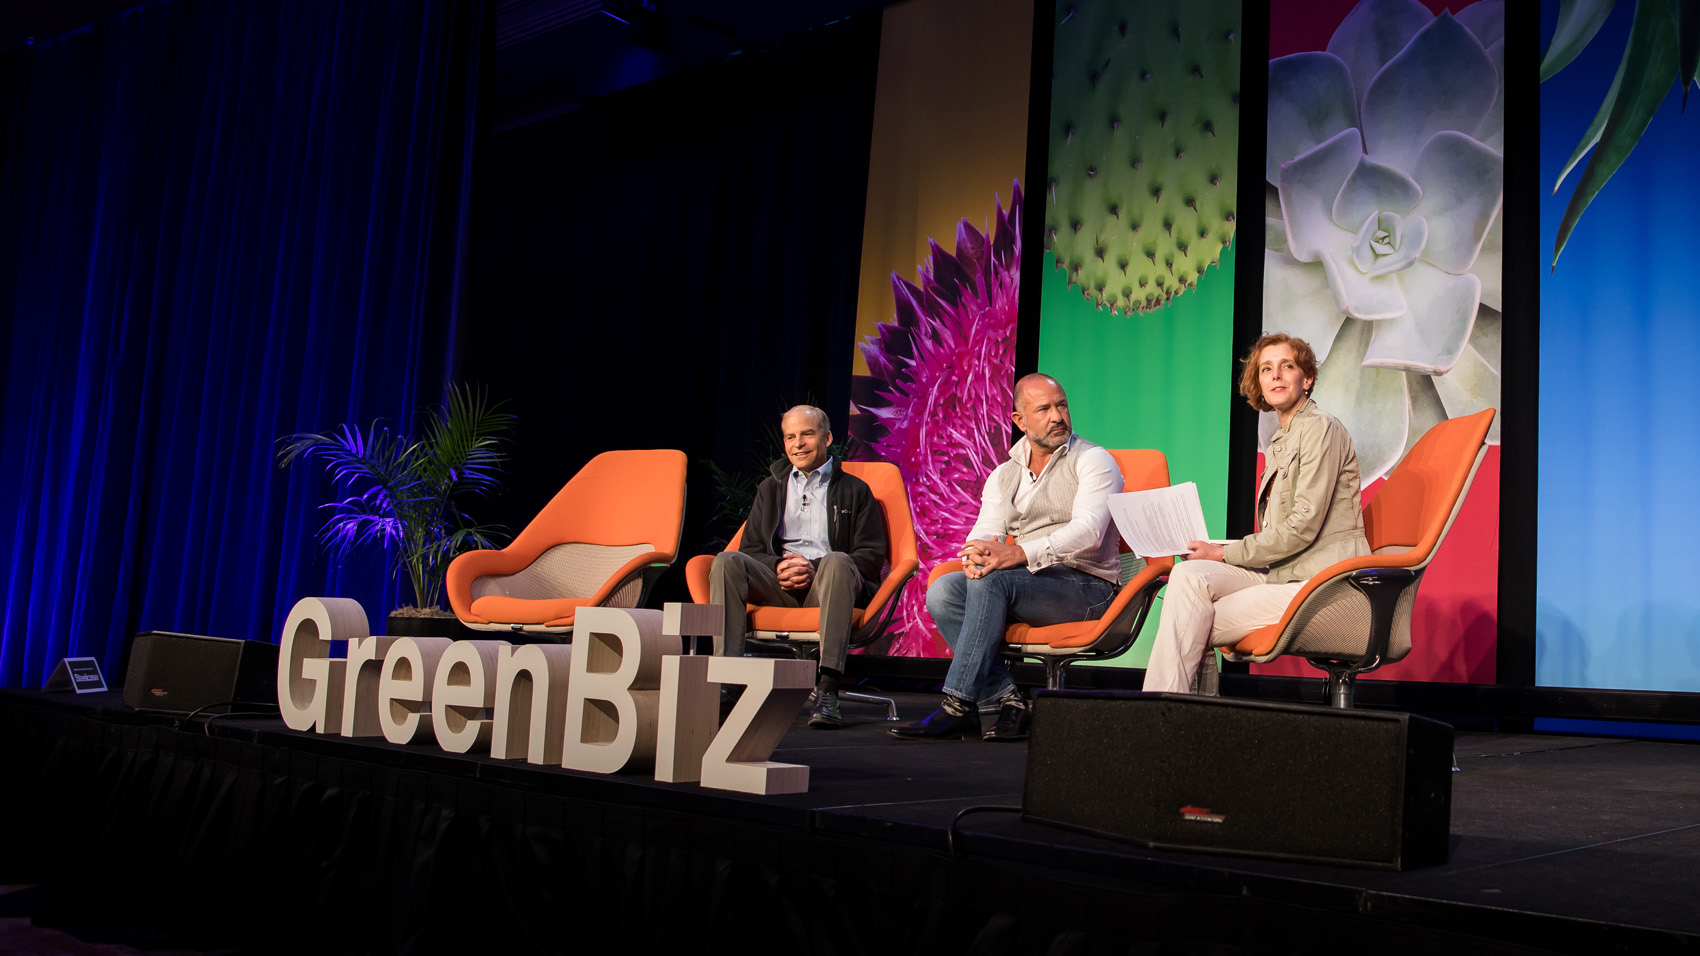 fisk johnson participating in a panel discussion on ocean plastic at green biz